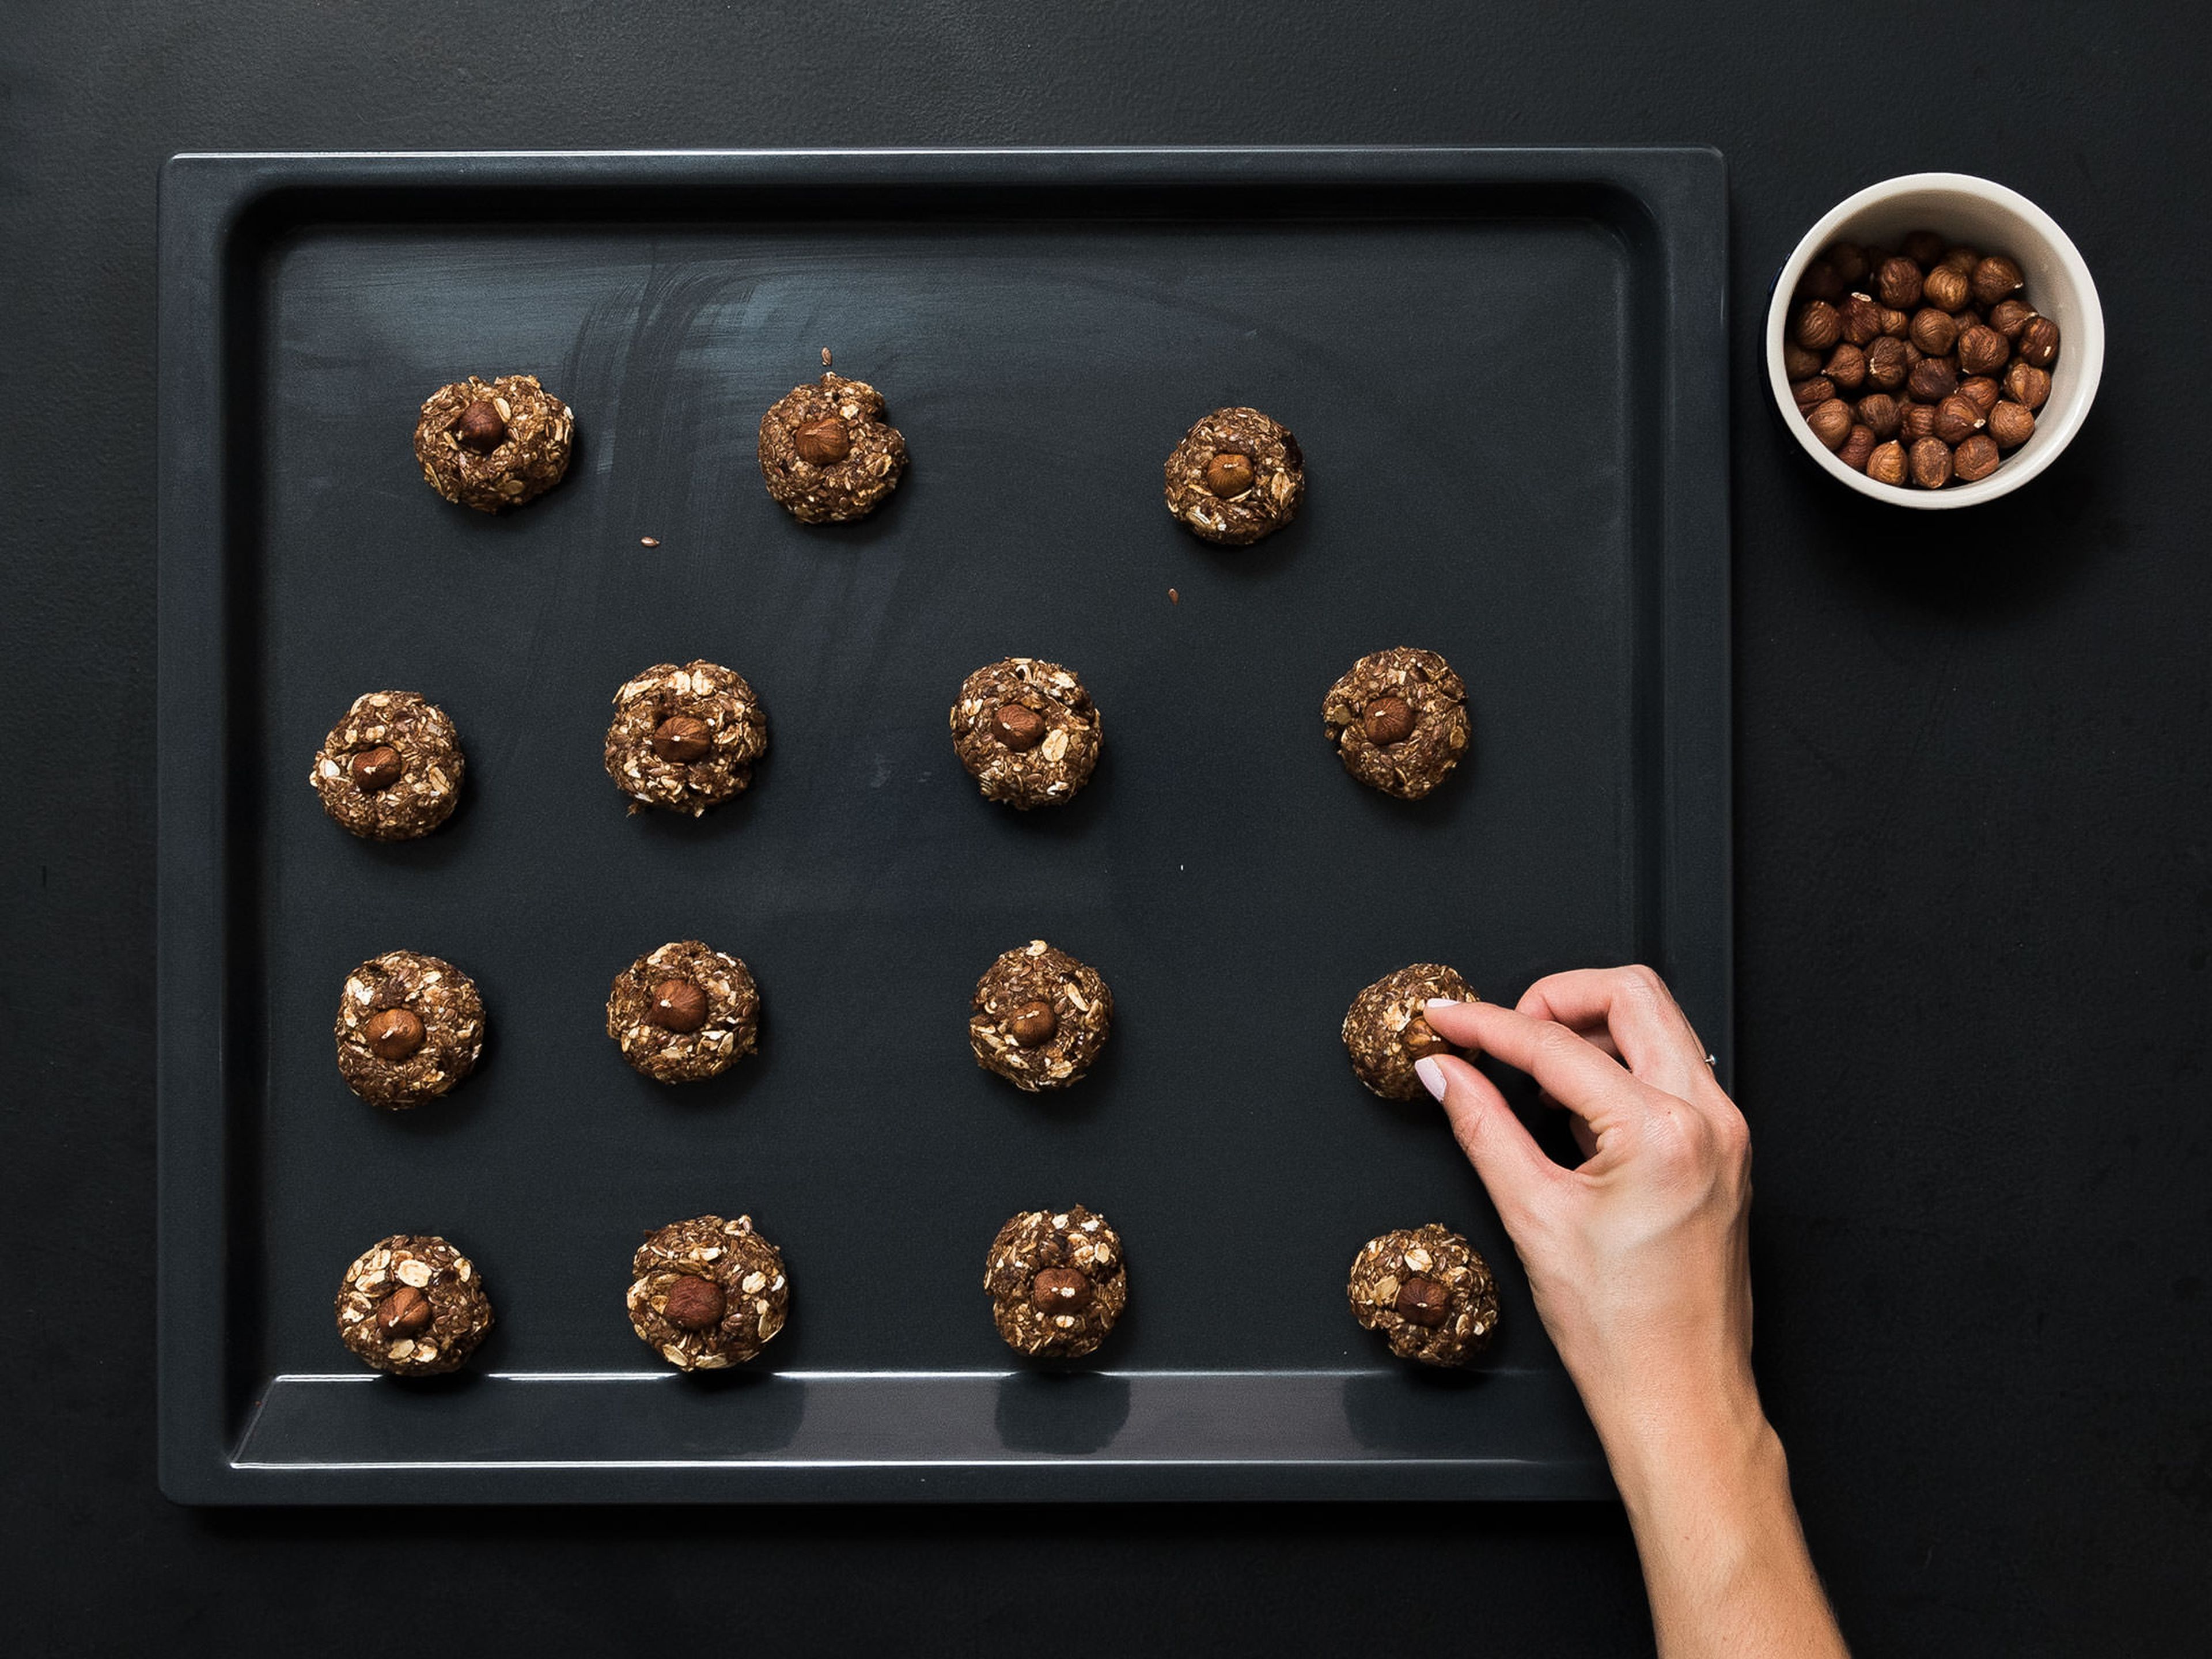 Form small balls of dough and place on a parchment-lined baking sheet. Lightly press 1 hazelnut into the top of each ball. Place in oven at 180°C/350°F and bake for approx. 15 min. Set aside to cool. Enjoy!